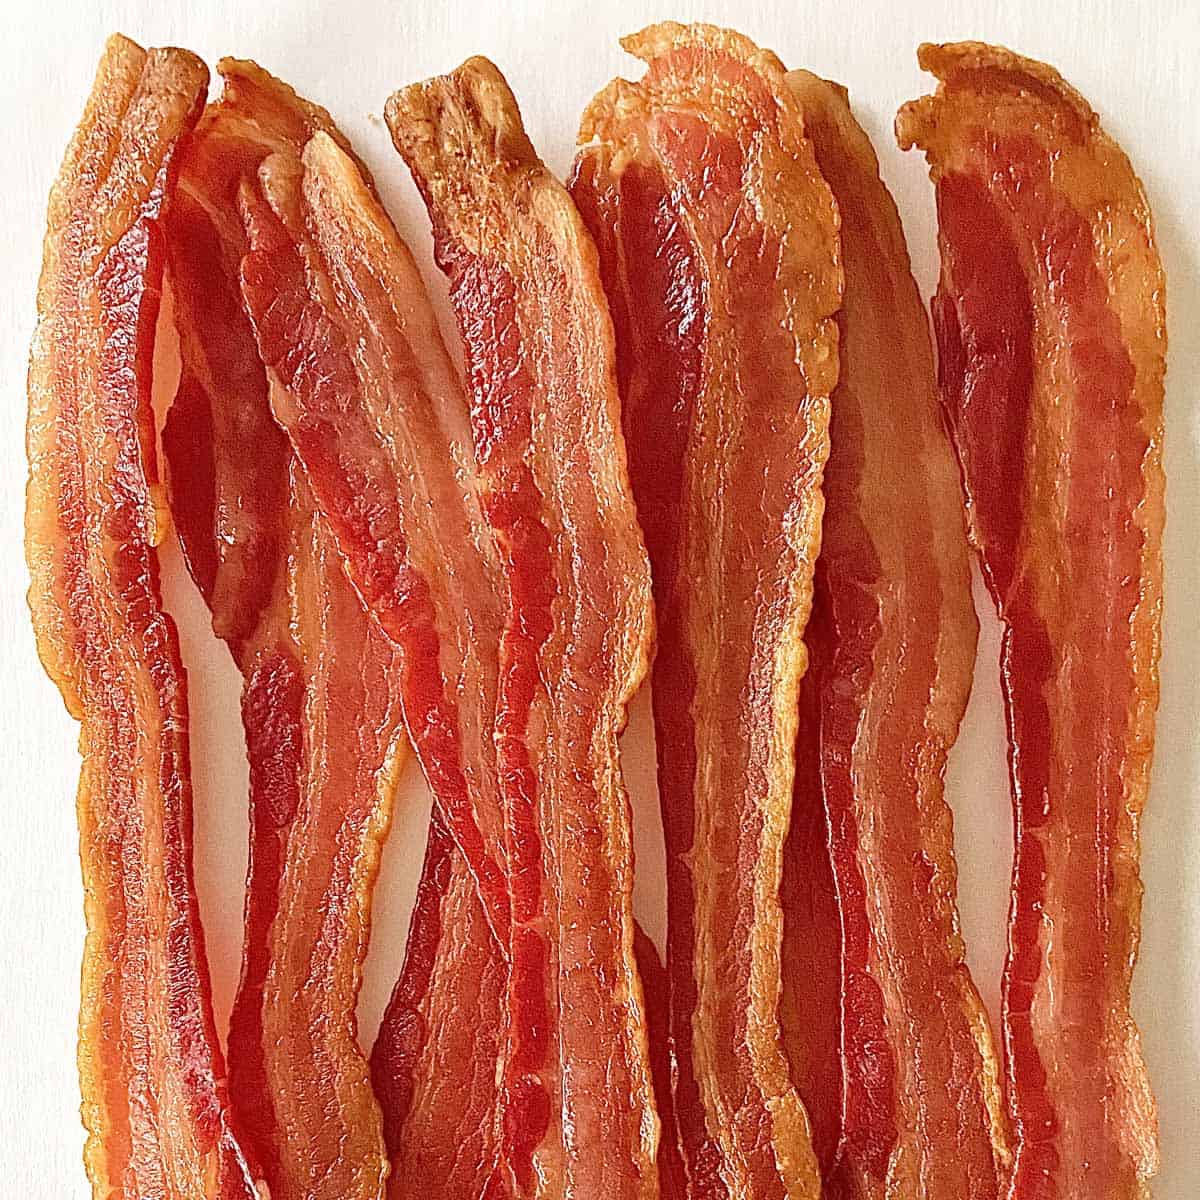 Bacon frying in stove top pan. Sizzling bacon strips in silver skillet.  Stock Photo